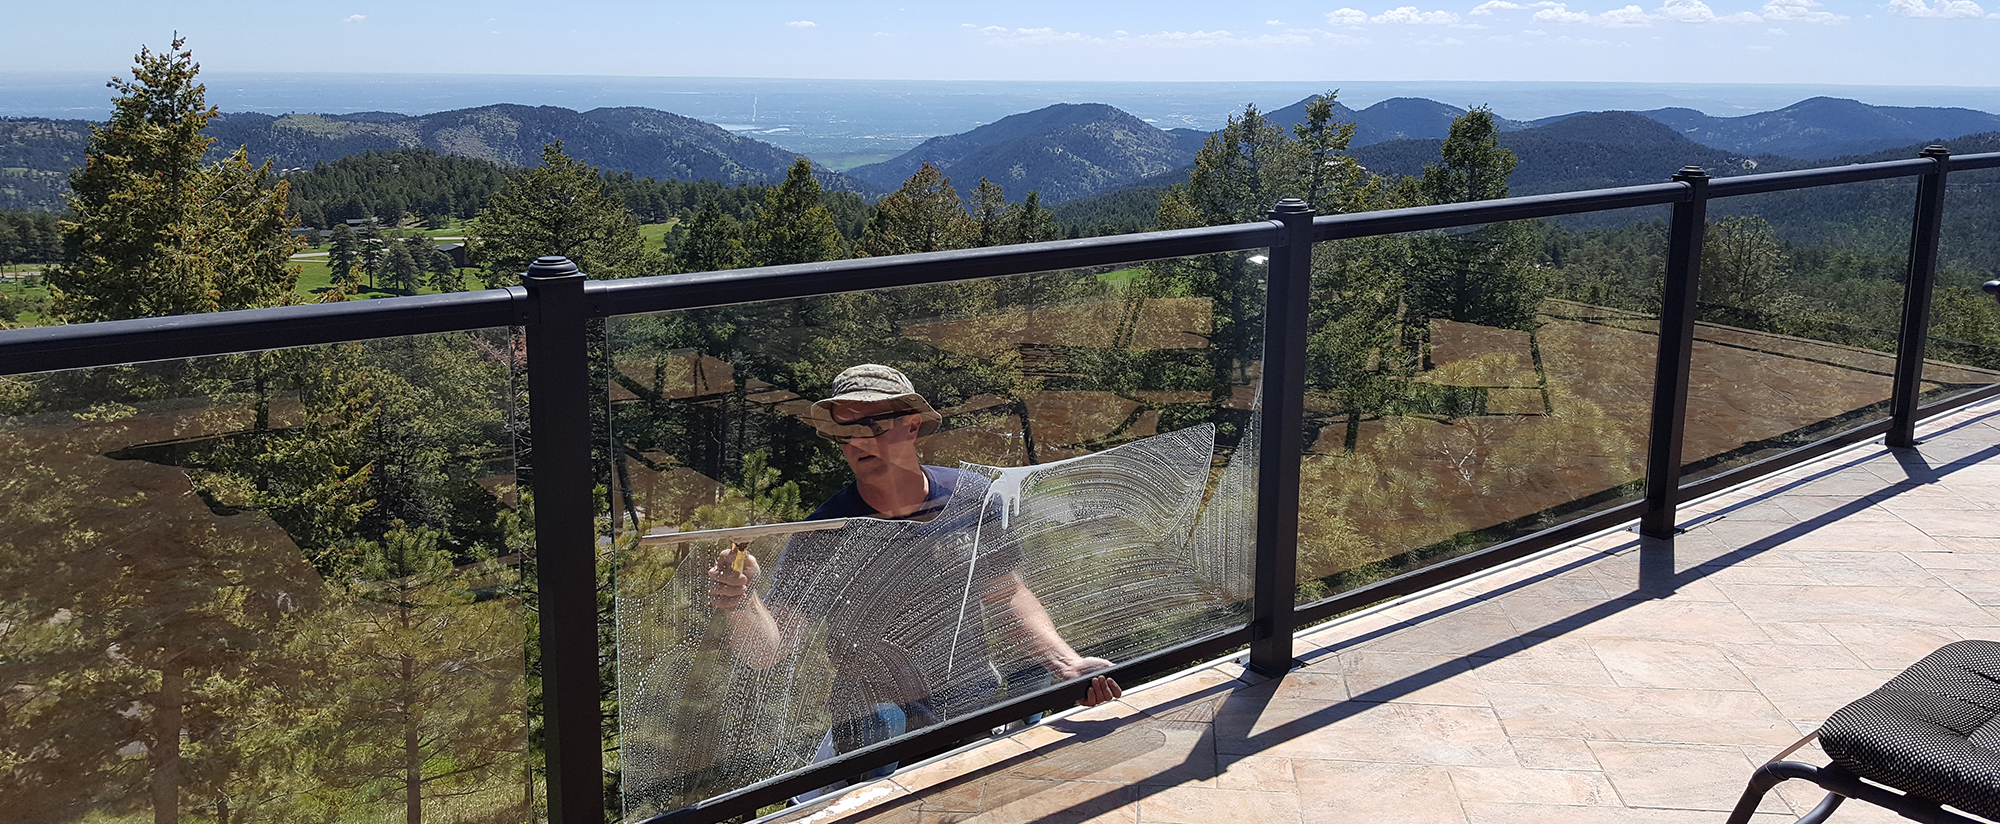 PEAK Window Cleaning, LLC is based in Evergreen, CO and serves the foothills and mountain communities.